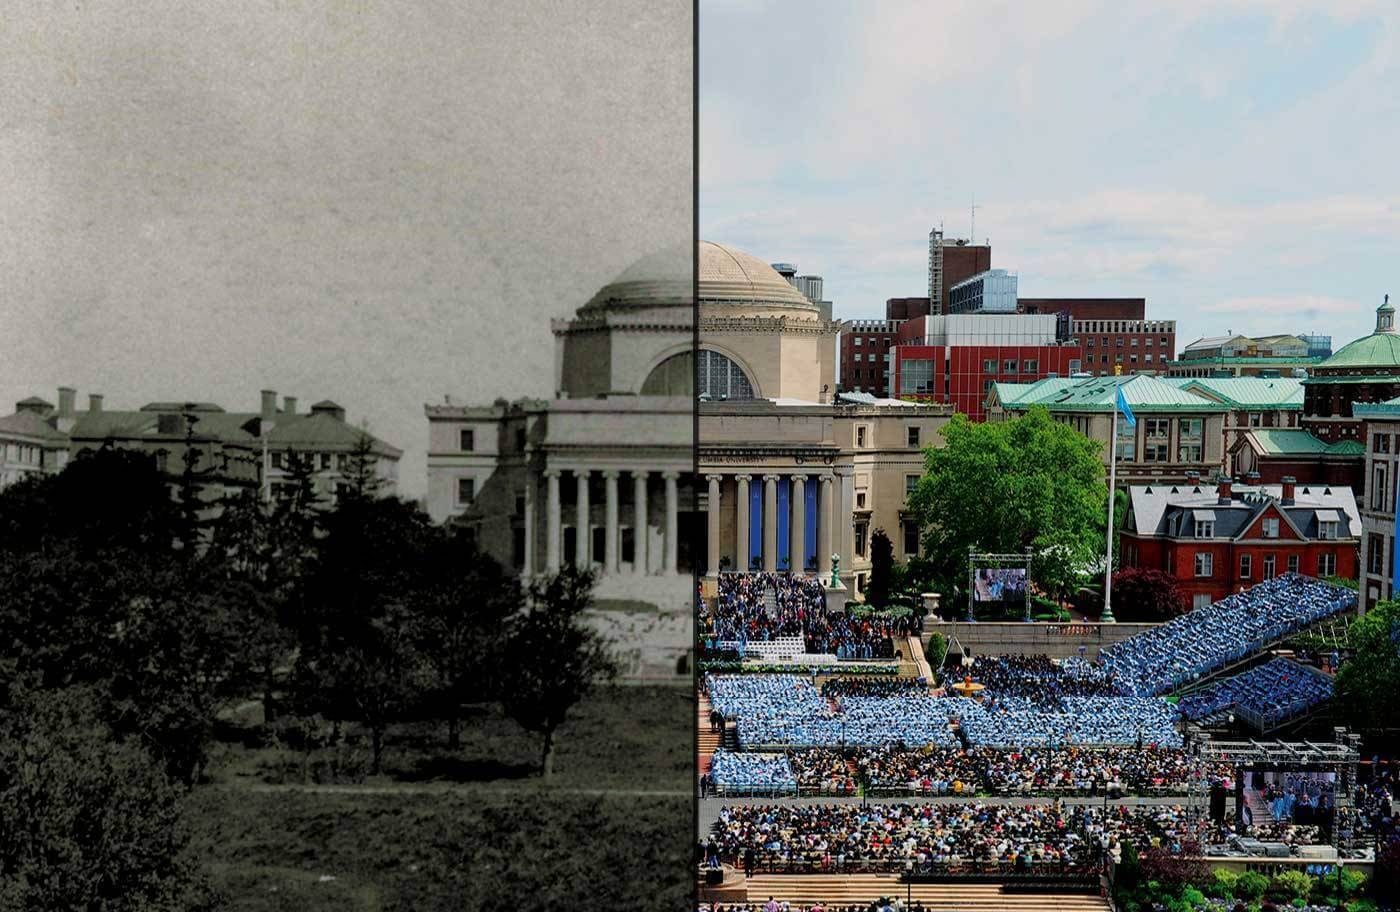 Columbia University Old and New side by side